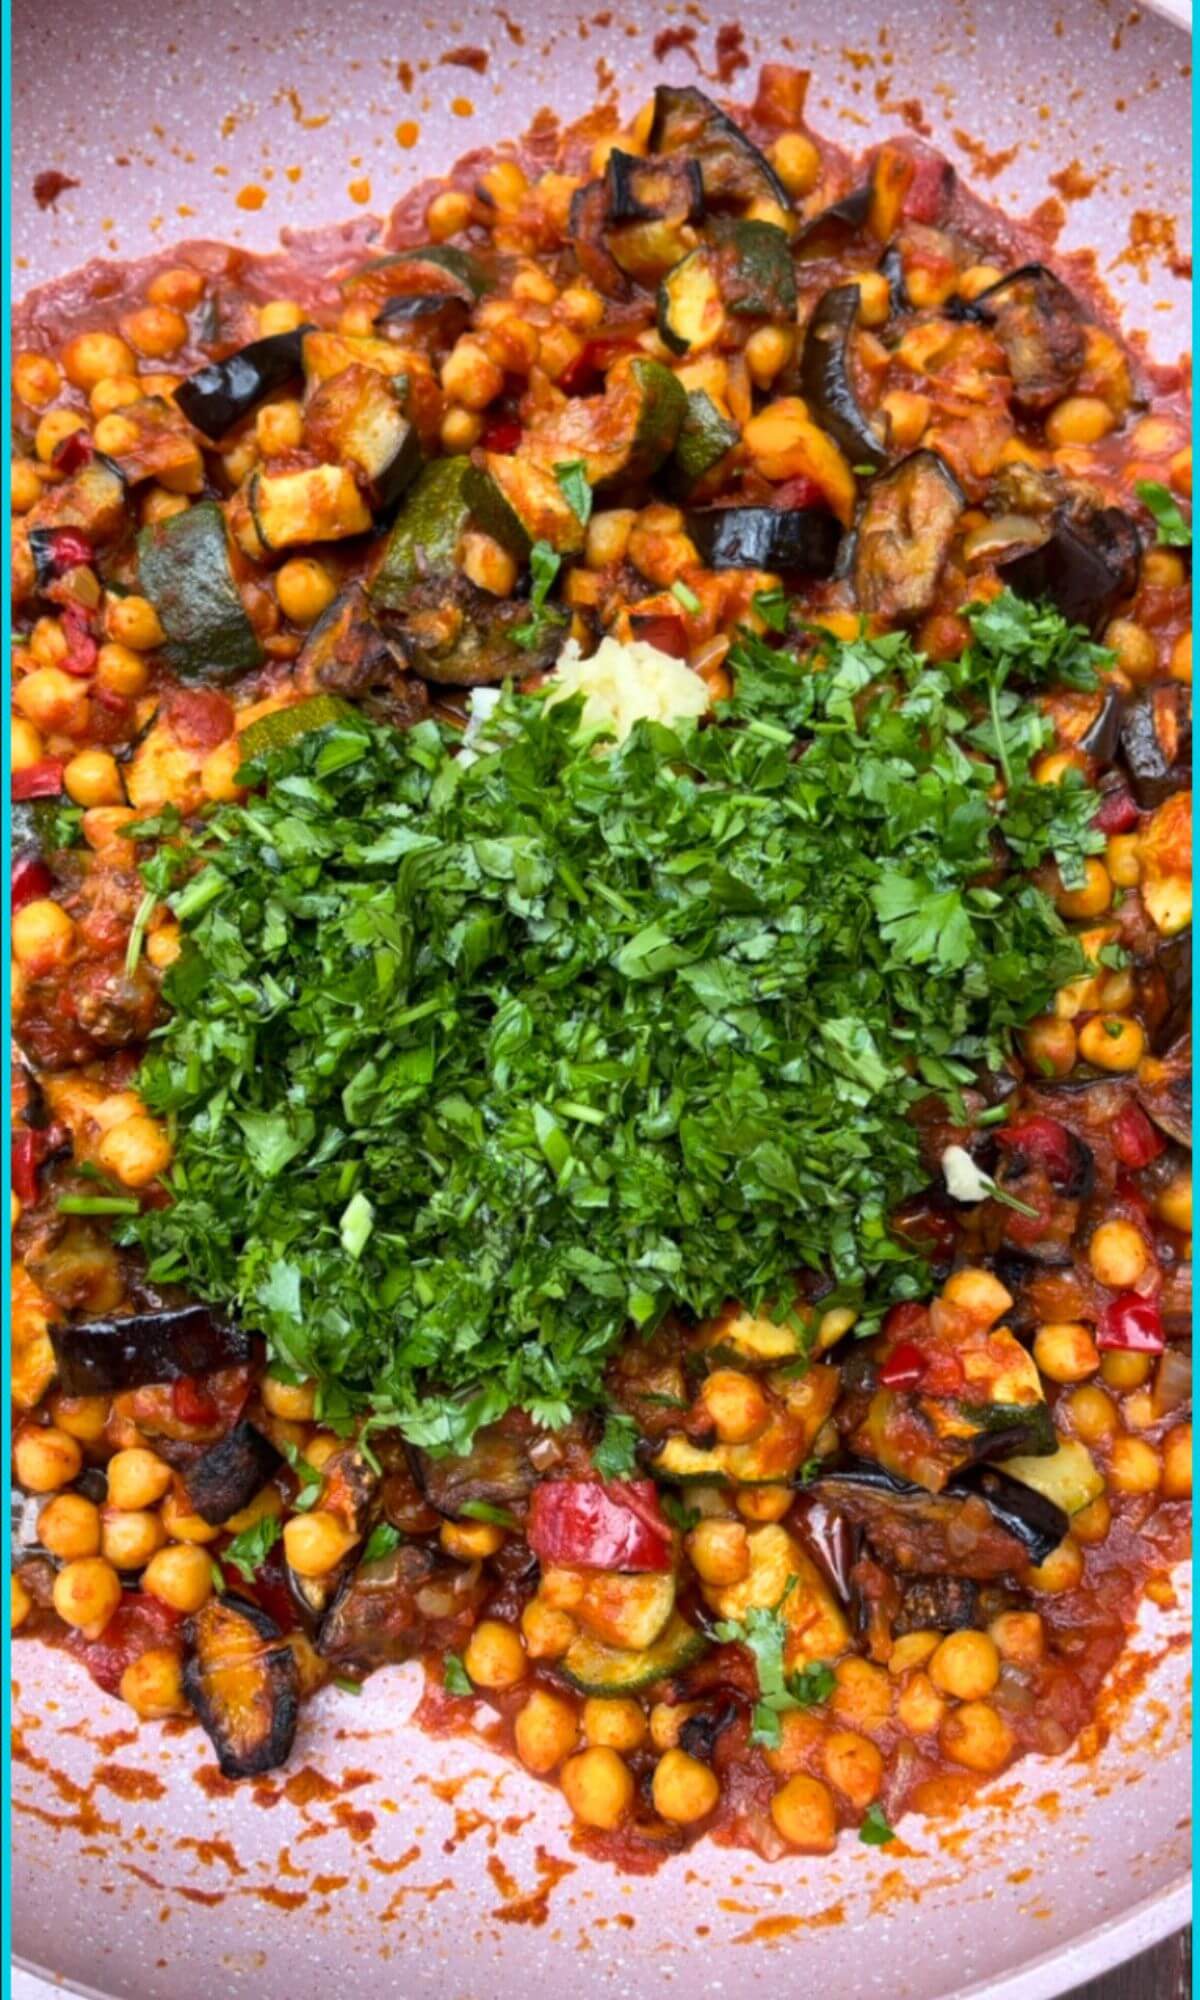 Delicious chickpea ratatouille in a pan, garnished with freshly chopped coriander and parsley, and two grated garlic cloves.